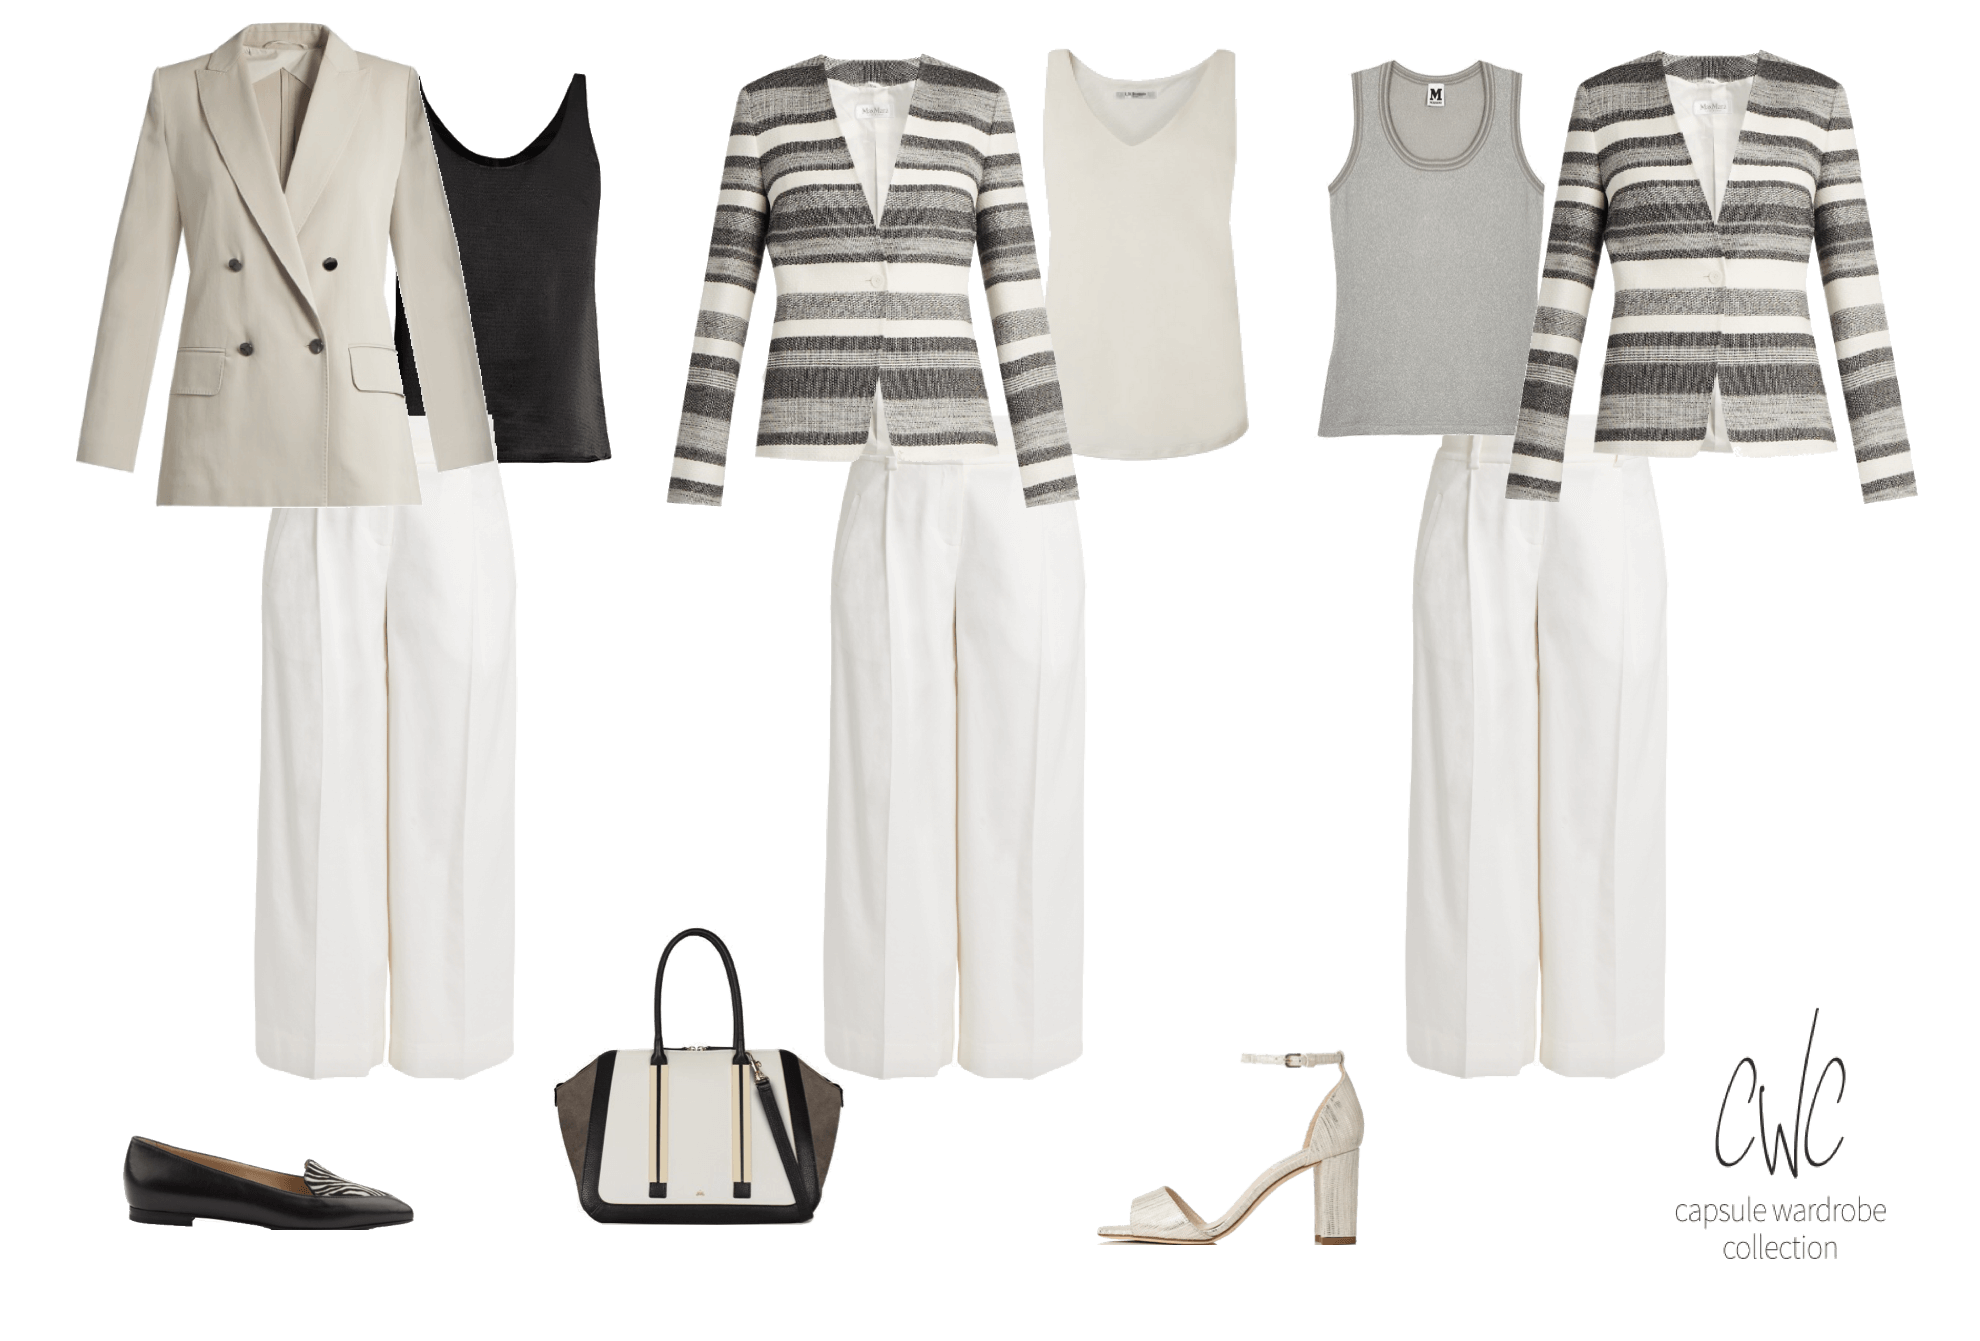 Ivory linen culottes as part of a Summer business capsule wardrobe curated by Capsule Wardrobe Collection